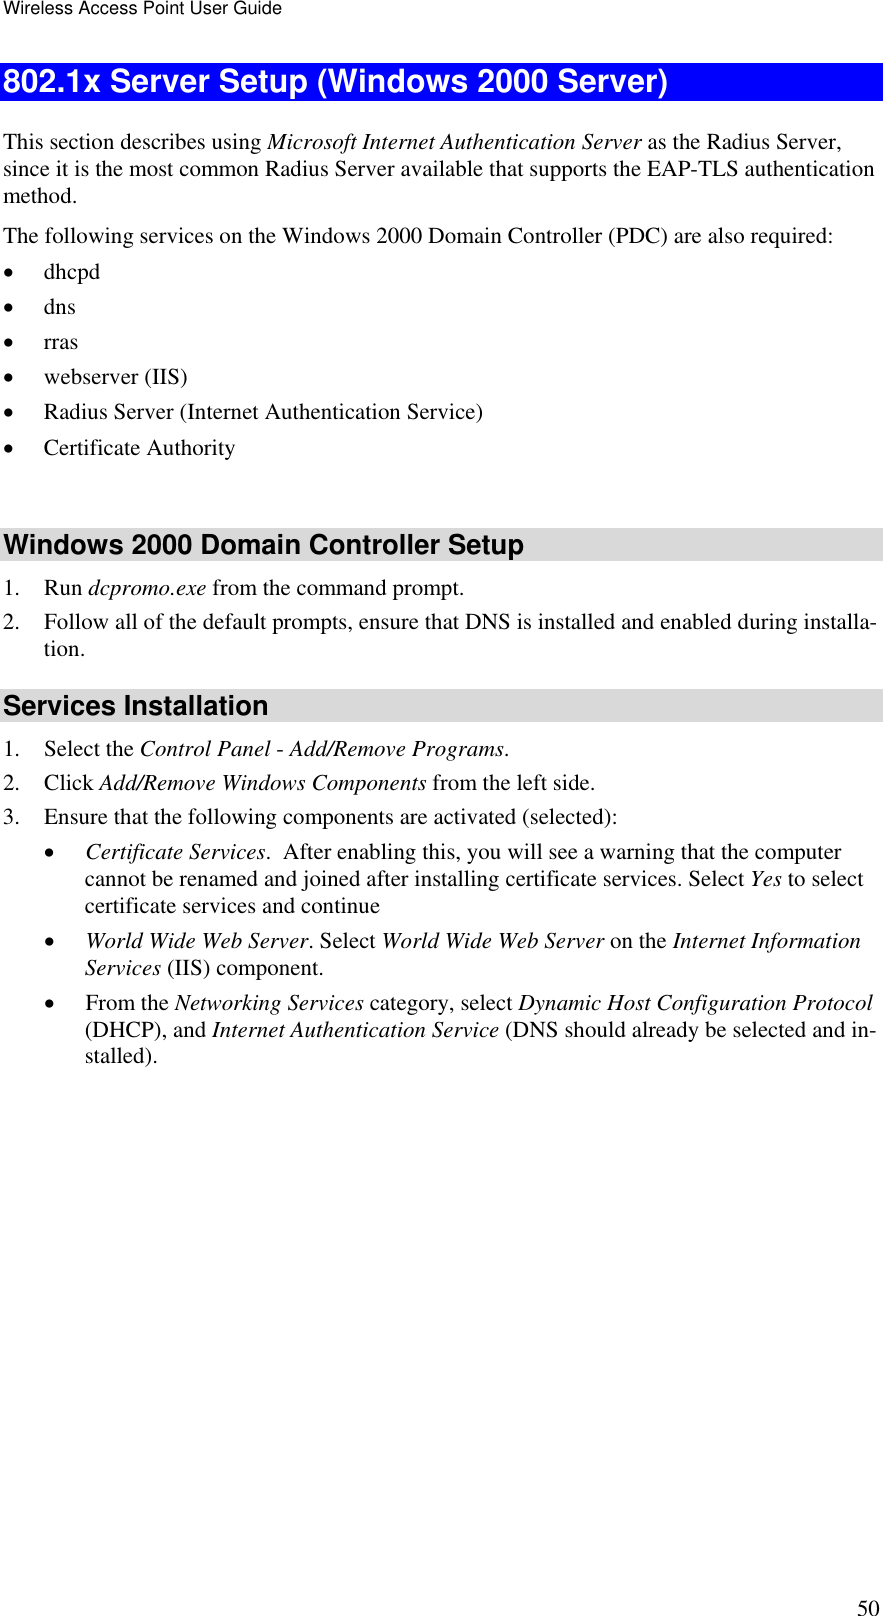 Wireless Access Point User Guide 50 802.1x Server Setup (Windows 2000 Server) This section describes using Microsoft Internet Authentication Server as the Radius Server, since it is the most common Radius Server available that supports the EAP-TLS authentication method.  The following services on the Windows 2000 Domain Controller (PDC) are also required: •  dhcpd  •  dns  •  rras •  webserver (IIS)  •  Radius Server (Internet Authentication Service)  •  Certificate Authority   Windows 2000 Domain Controller Setup 1. Run dcpromo.exe from the command prompt.  2.  Follow all of the default prompts, ensure that DNS is installed and enabled during installa-tion.  Services Installation 1. Select the Control Panel - Add/Remove Programs.  2. Click Add/Remove Windows Components from the left side.  3.  Ensure that the following components are activated (selected):  •  Certificate Services.  After enabling this, you will see a warning that the computer cannot be renamed and joined after installing certificate services. Select Yes to select certificate services and continue •  World Wide Web Server. Select World Wide Web Server on the Internet Information Services (IIS) component. •  From the Networking Services category, select Dynamic Host Configuration Protocol (DHCP), and Internet Authentication Service (DNS should already be selected and in-stalled). 